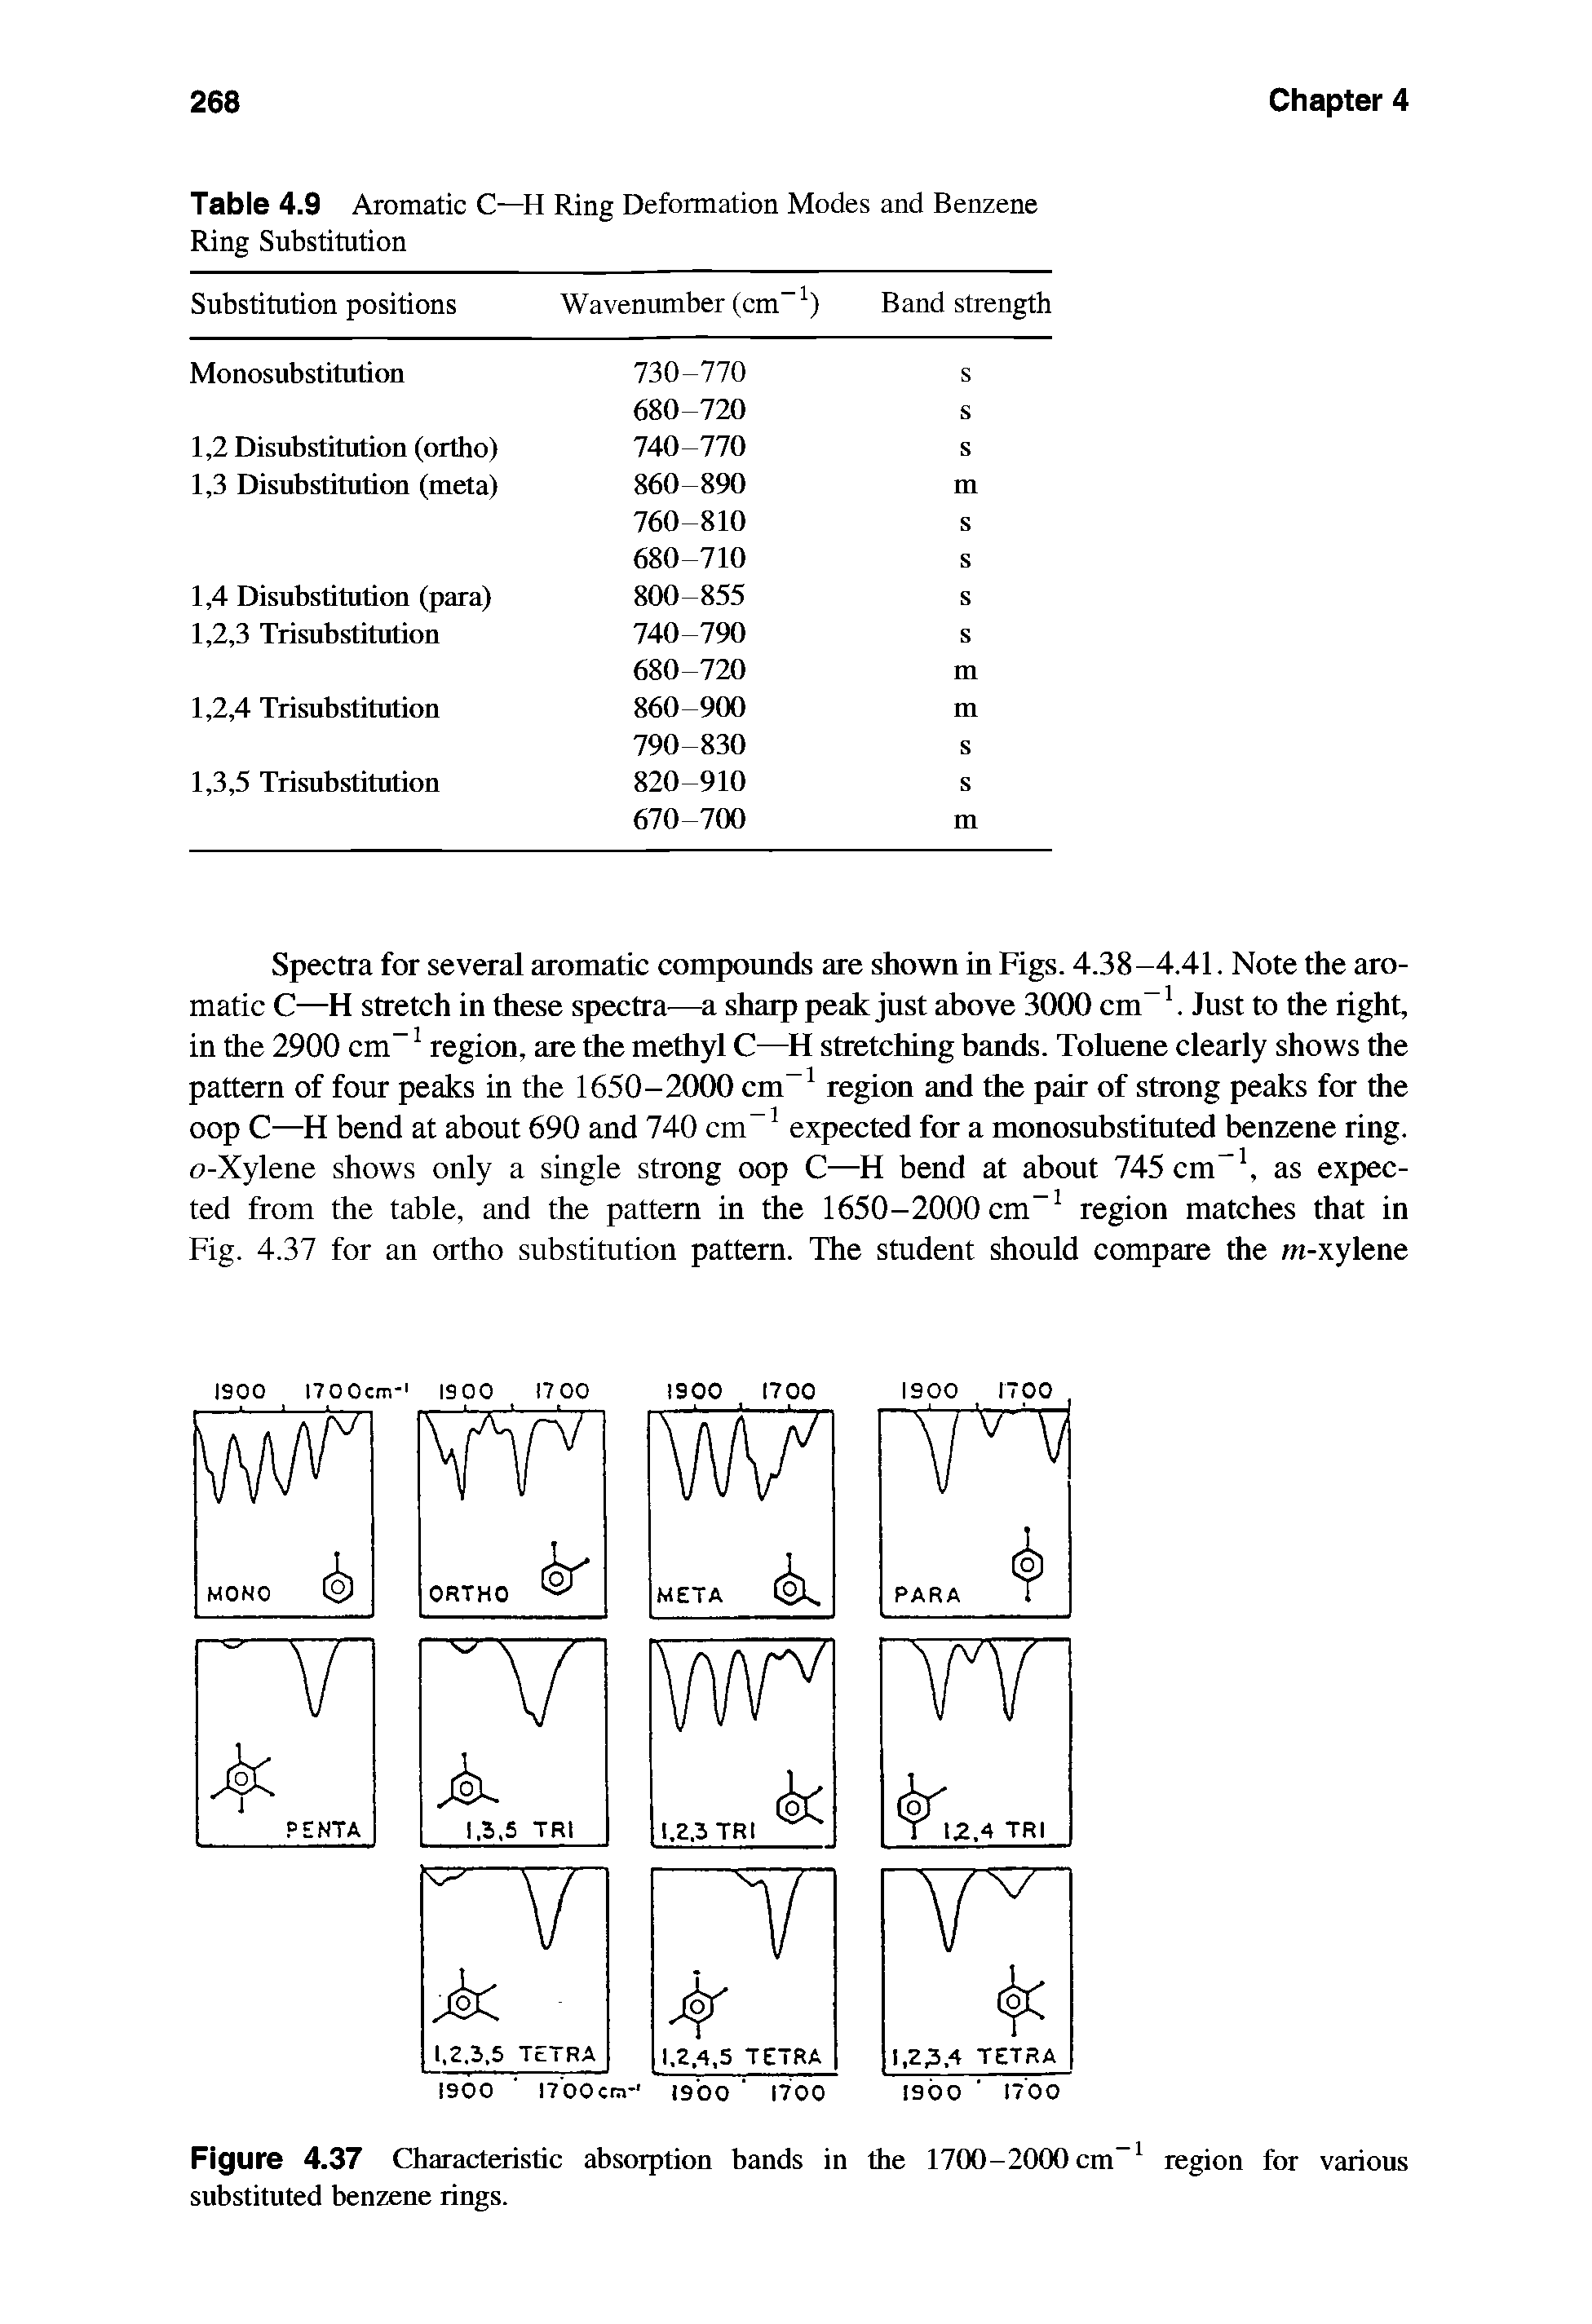 Table 4.9 Aromatic C—H Ring Deformation Modes and Benzene Ring Substitution...